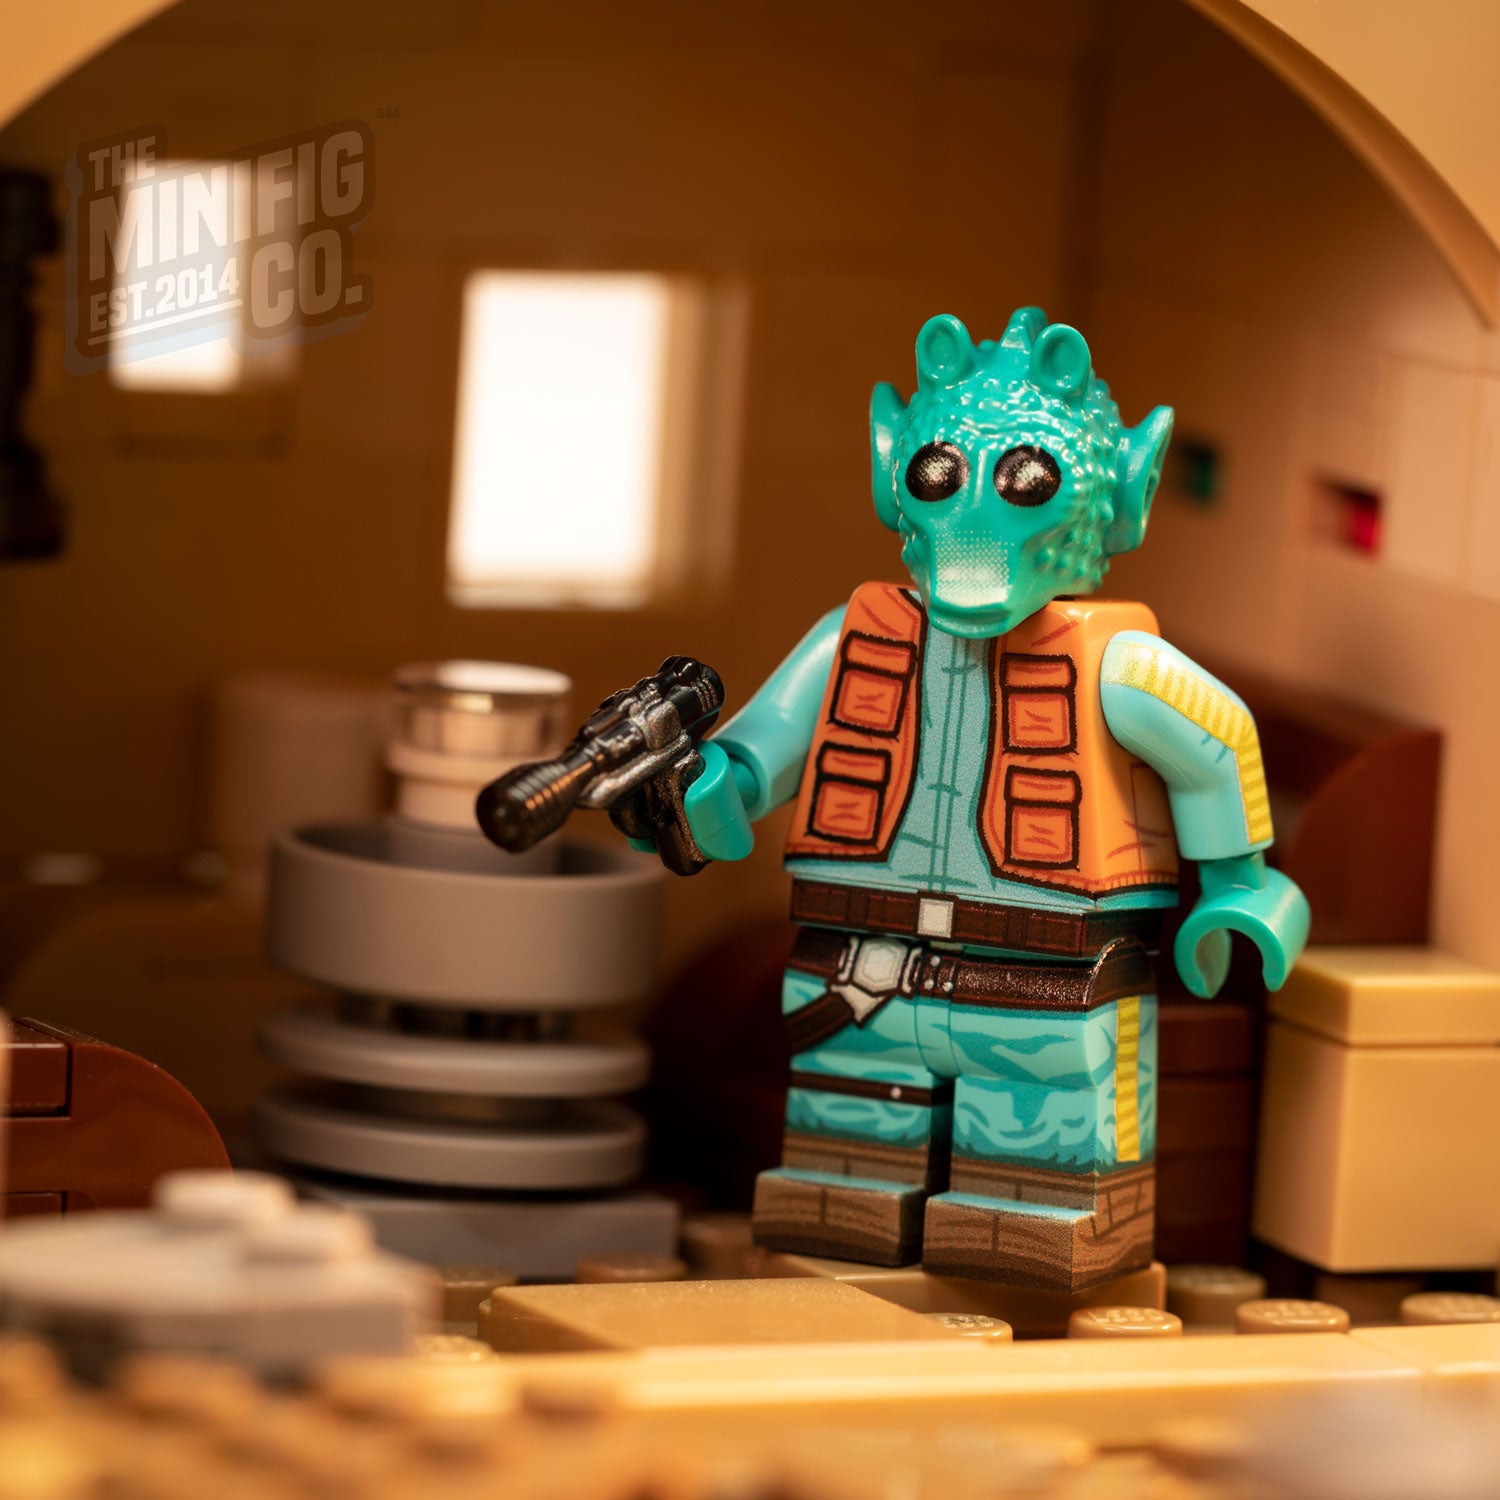 Green Space Lizard - The Minifig Co.